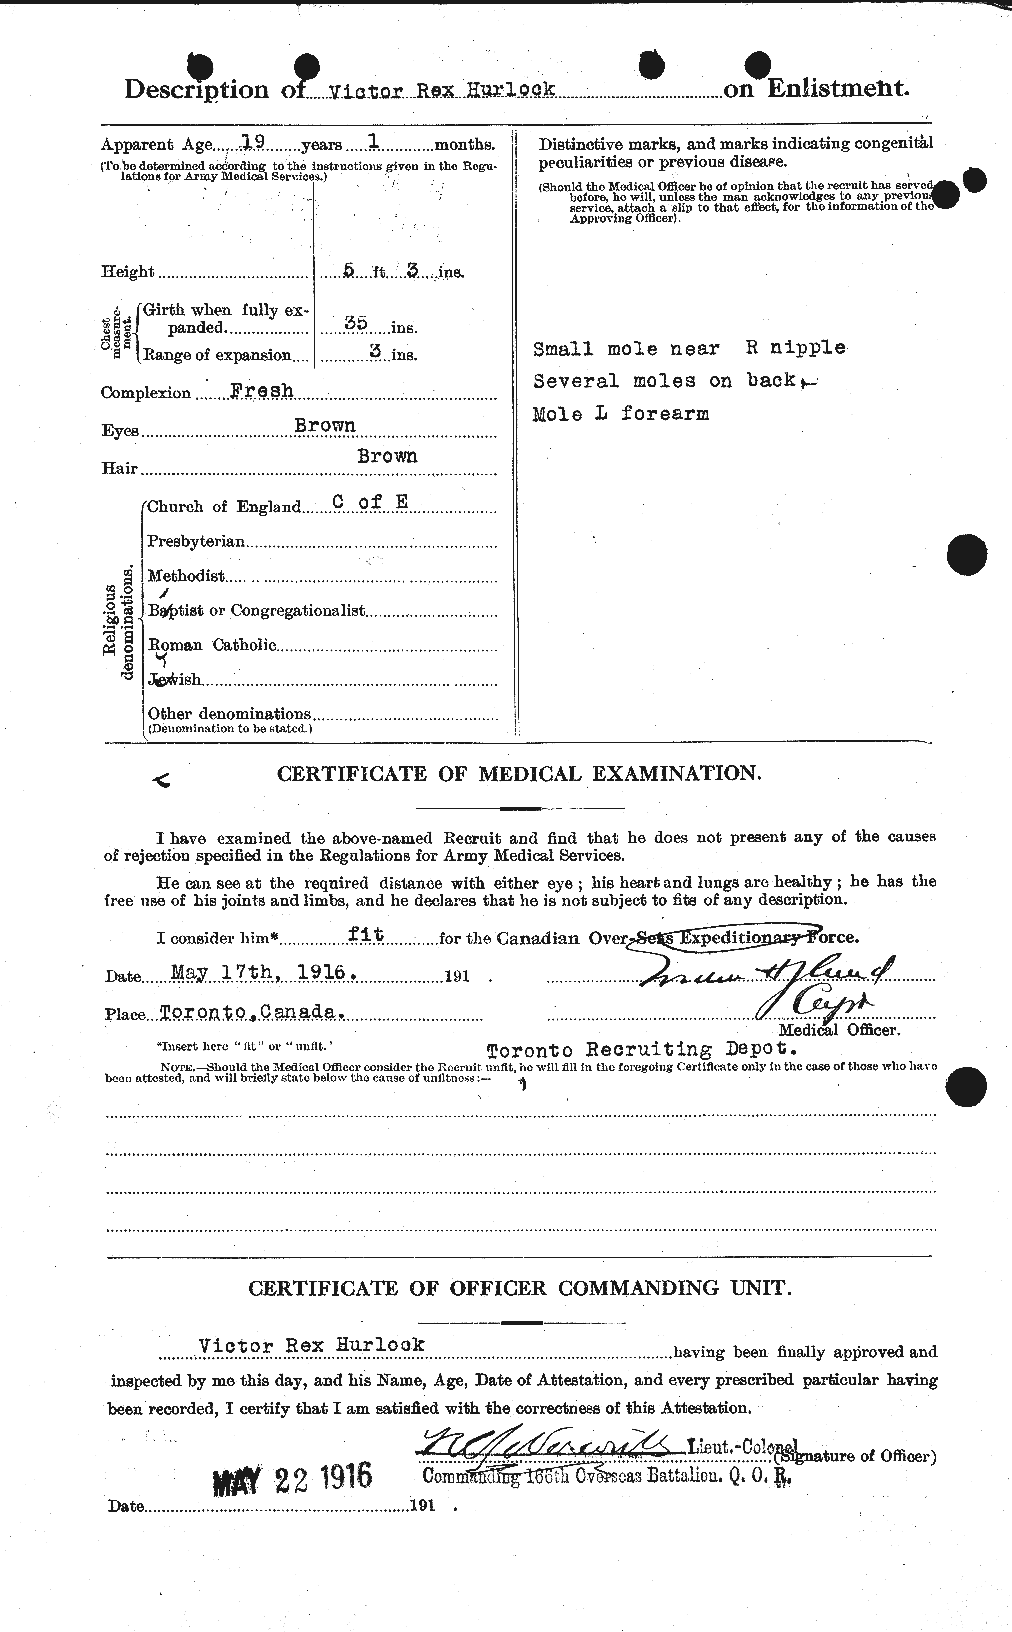 Personnel Records of the First World War - CEF 409831b